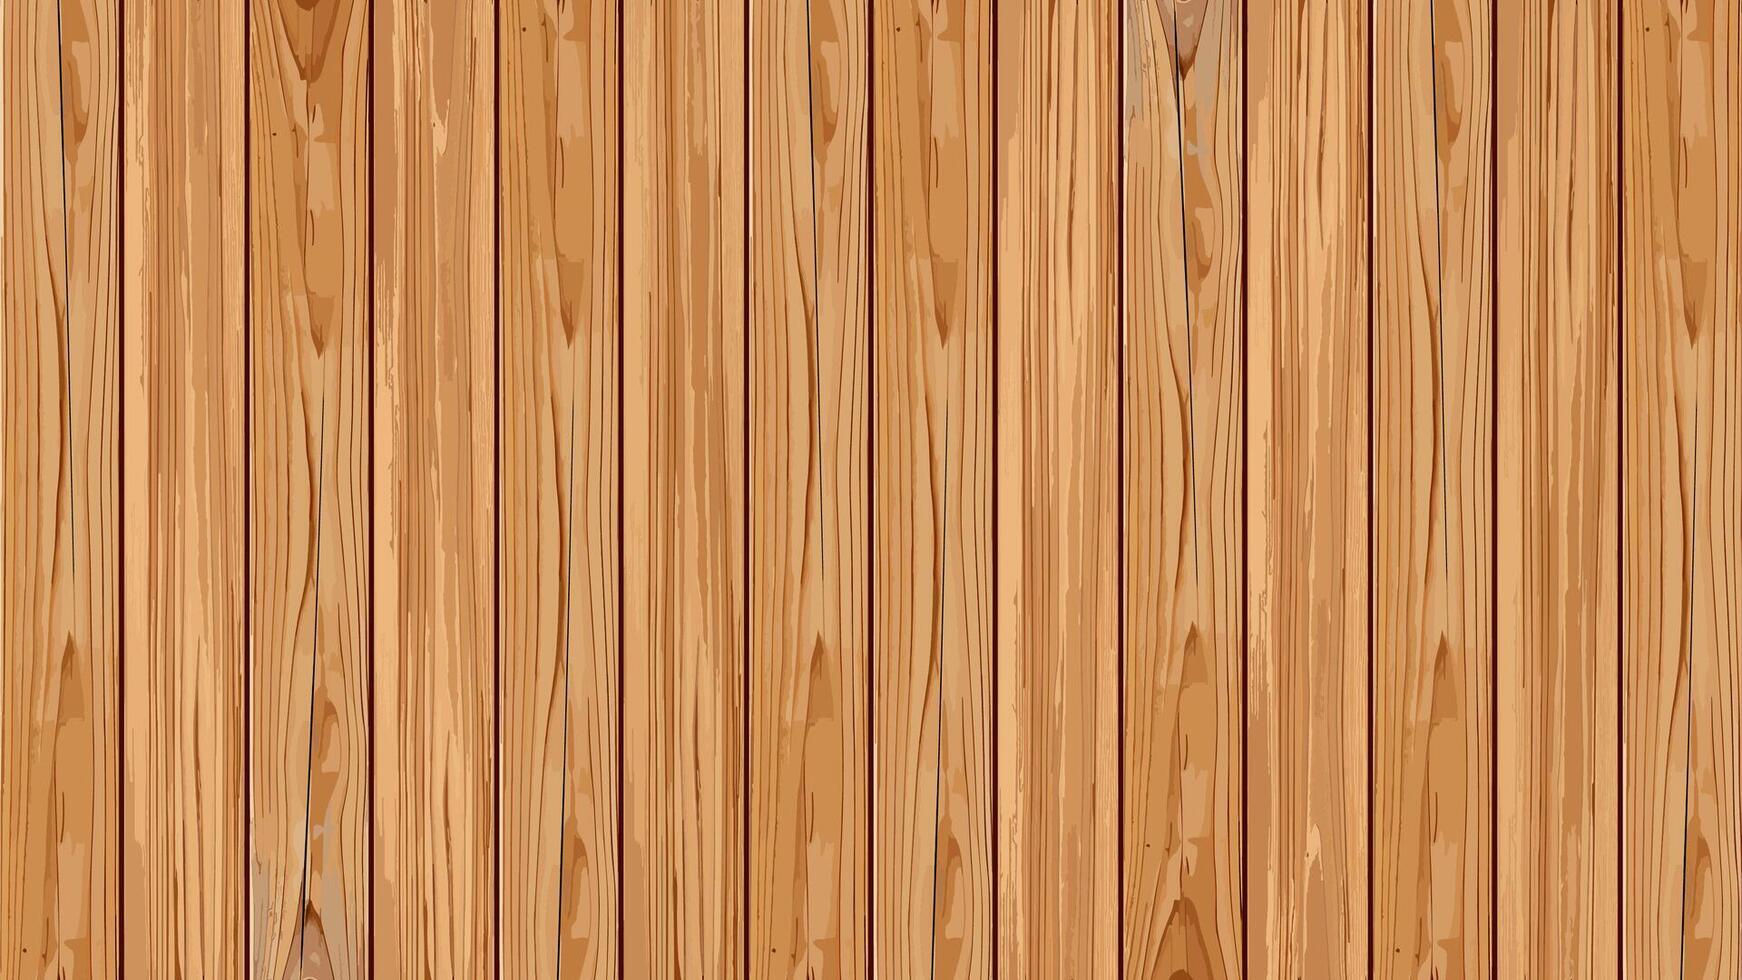 Panoramic view of a full wooden texture, highlighting the detailed wood grain and patterns vector